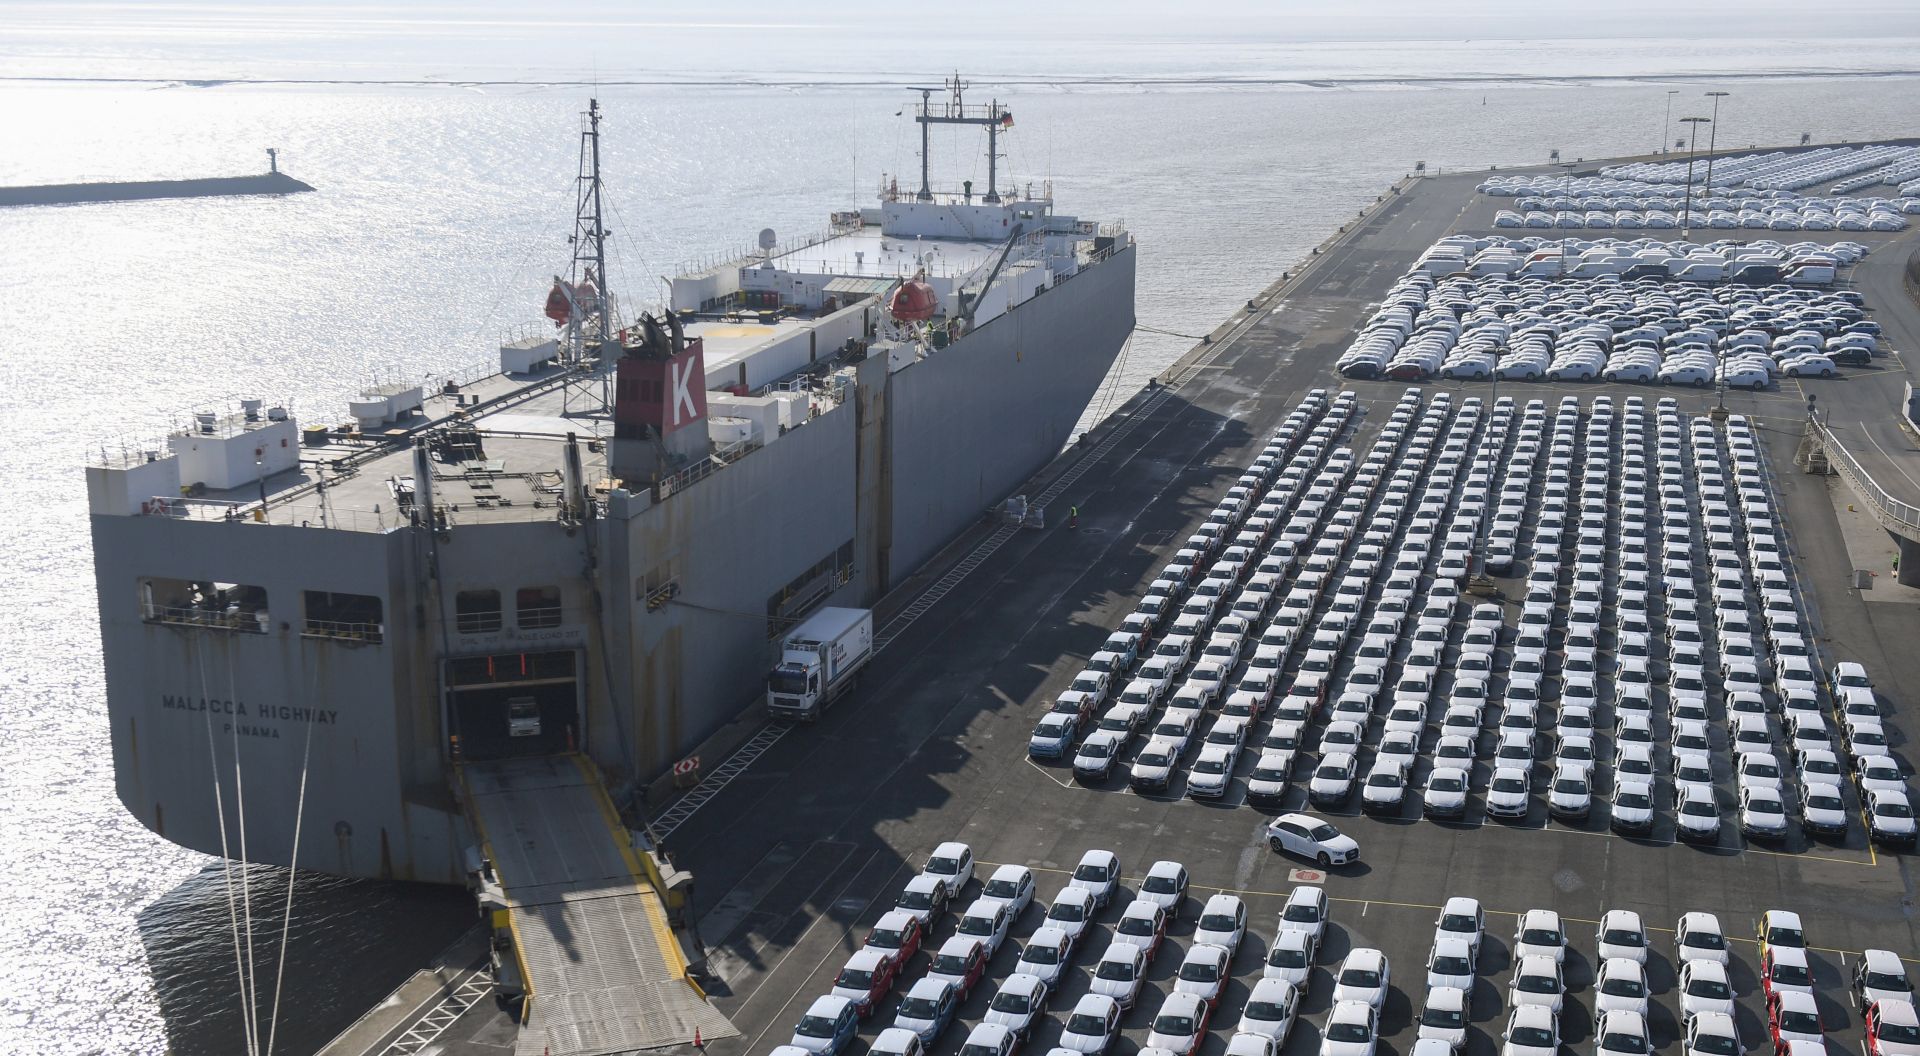 epa07772470 (FILE) - Volkswagen cars for export wait for shipping at the port in Emden, Germany, 09 March 2018 (reissued 14 August 2019). Germany's Federal Statistical Office (Statistisches Bundesamt) announced on 14 August 2019 that the country's gross domestic product (GDP) grew by 0.4 percent in the first quarter of 2019, shrinking by 0.1 percent compared to the previous quarter. Official data showed a decline in exports, amid concerns of a global slowdown.  EPA/DAVID HECKER *** Local Caption *** 54854697